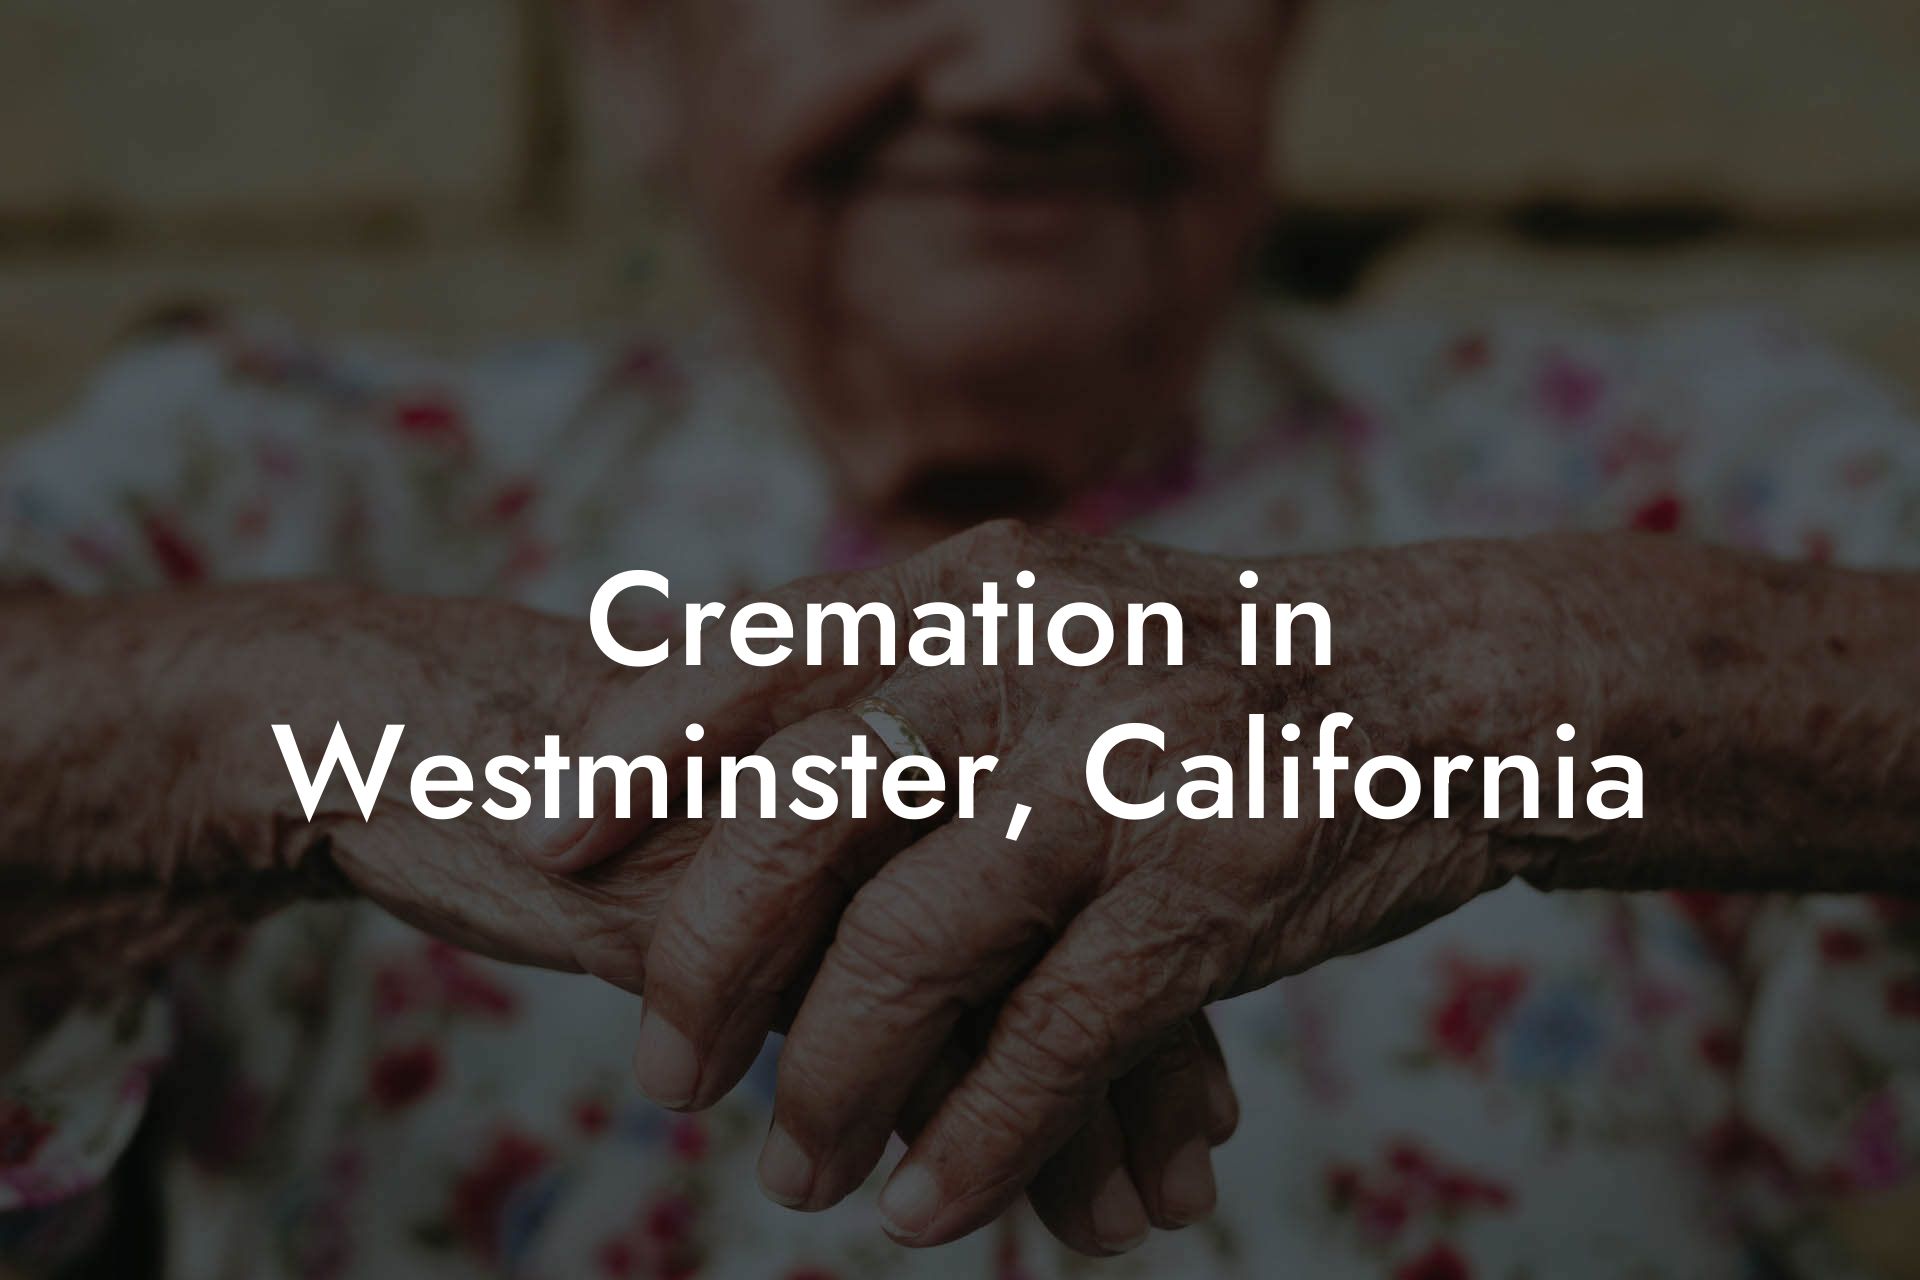 Cremation in Westminster, California